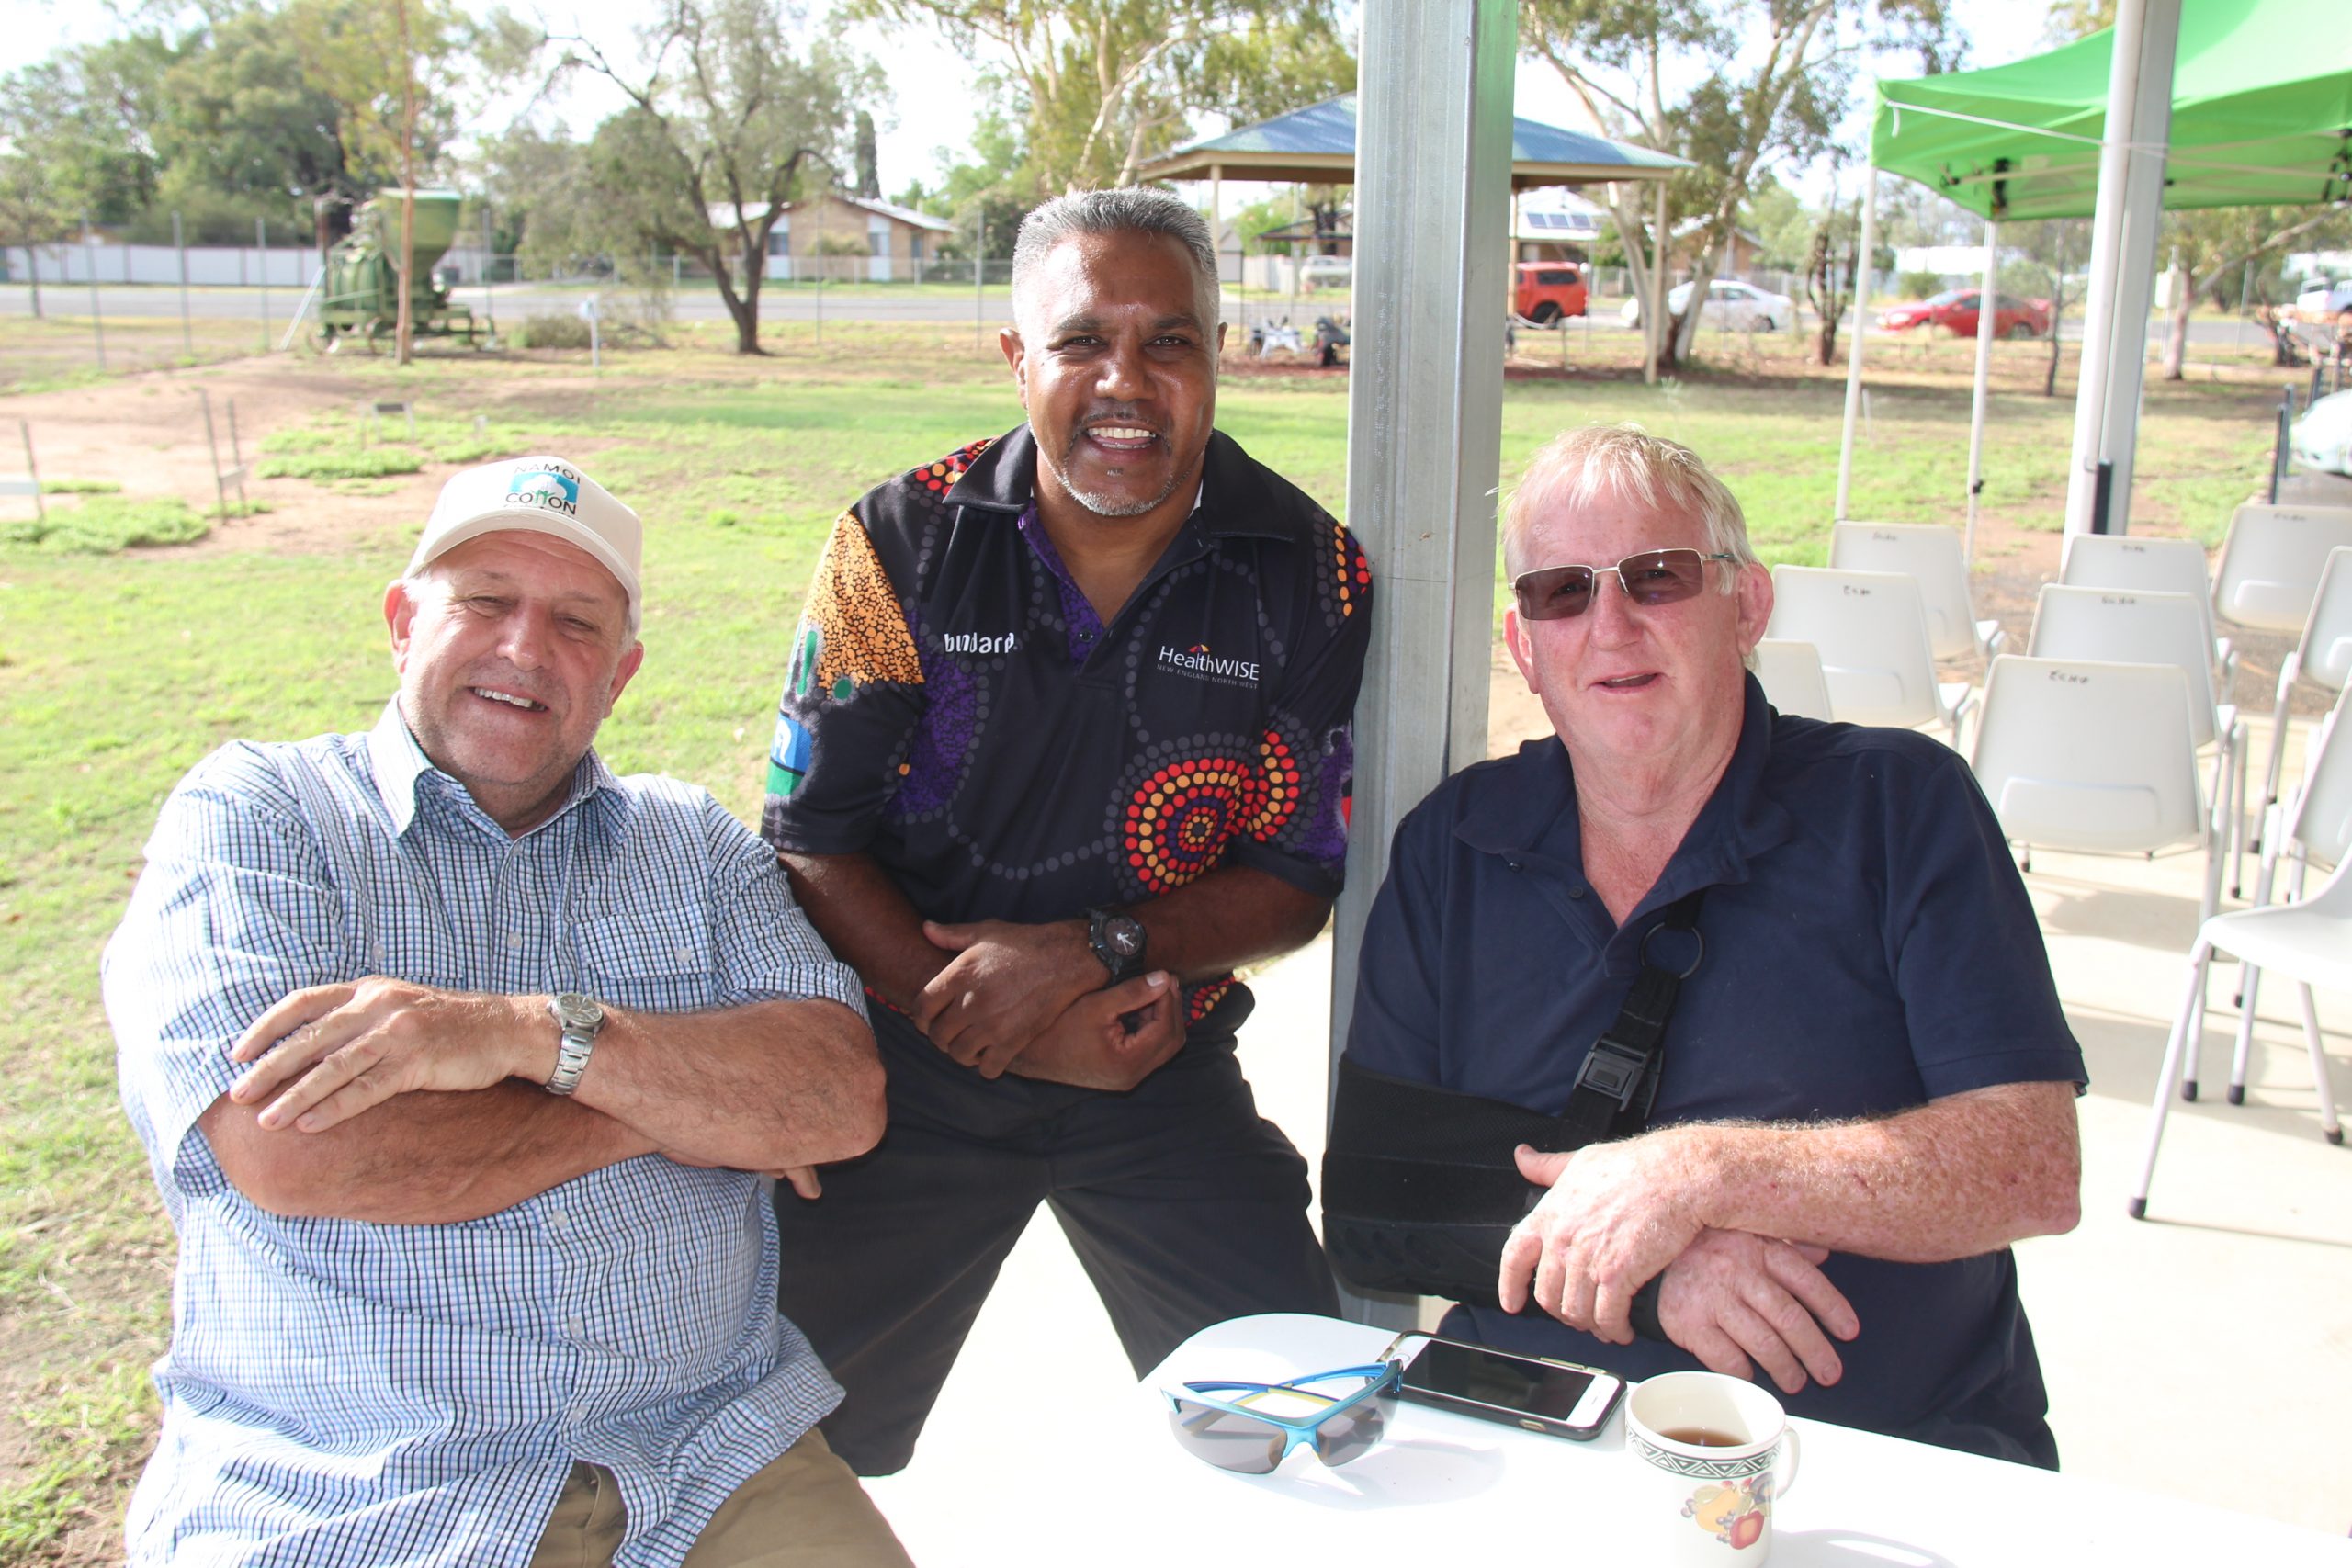 James Woodrow, Clifford Toomey and Terry Melton. Mr Toomey started proceedings by delivering a Welcome to Country and Acknowledgement of Country.